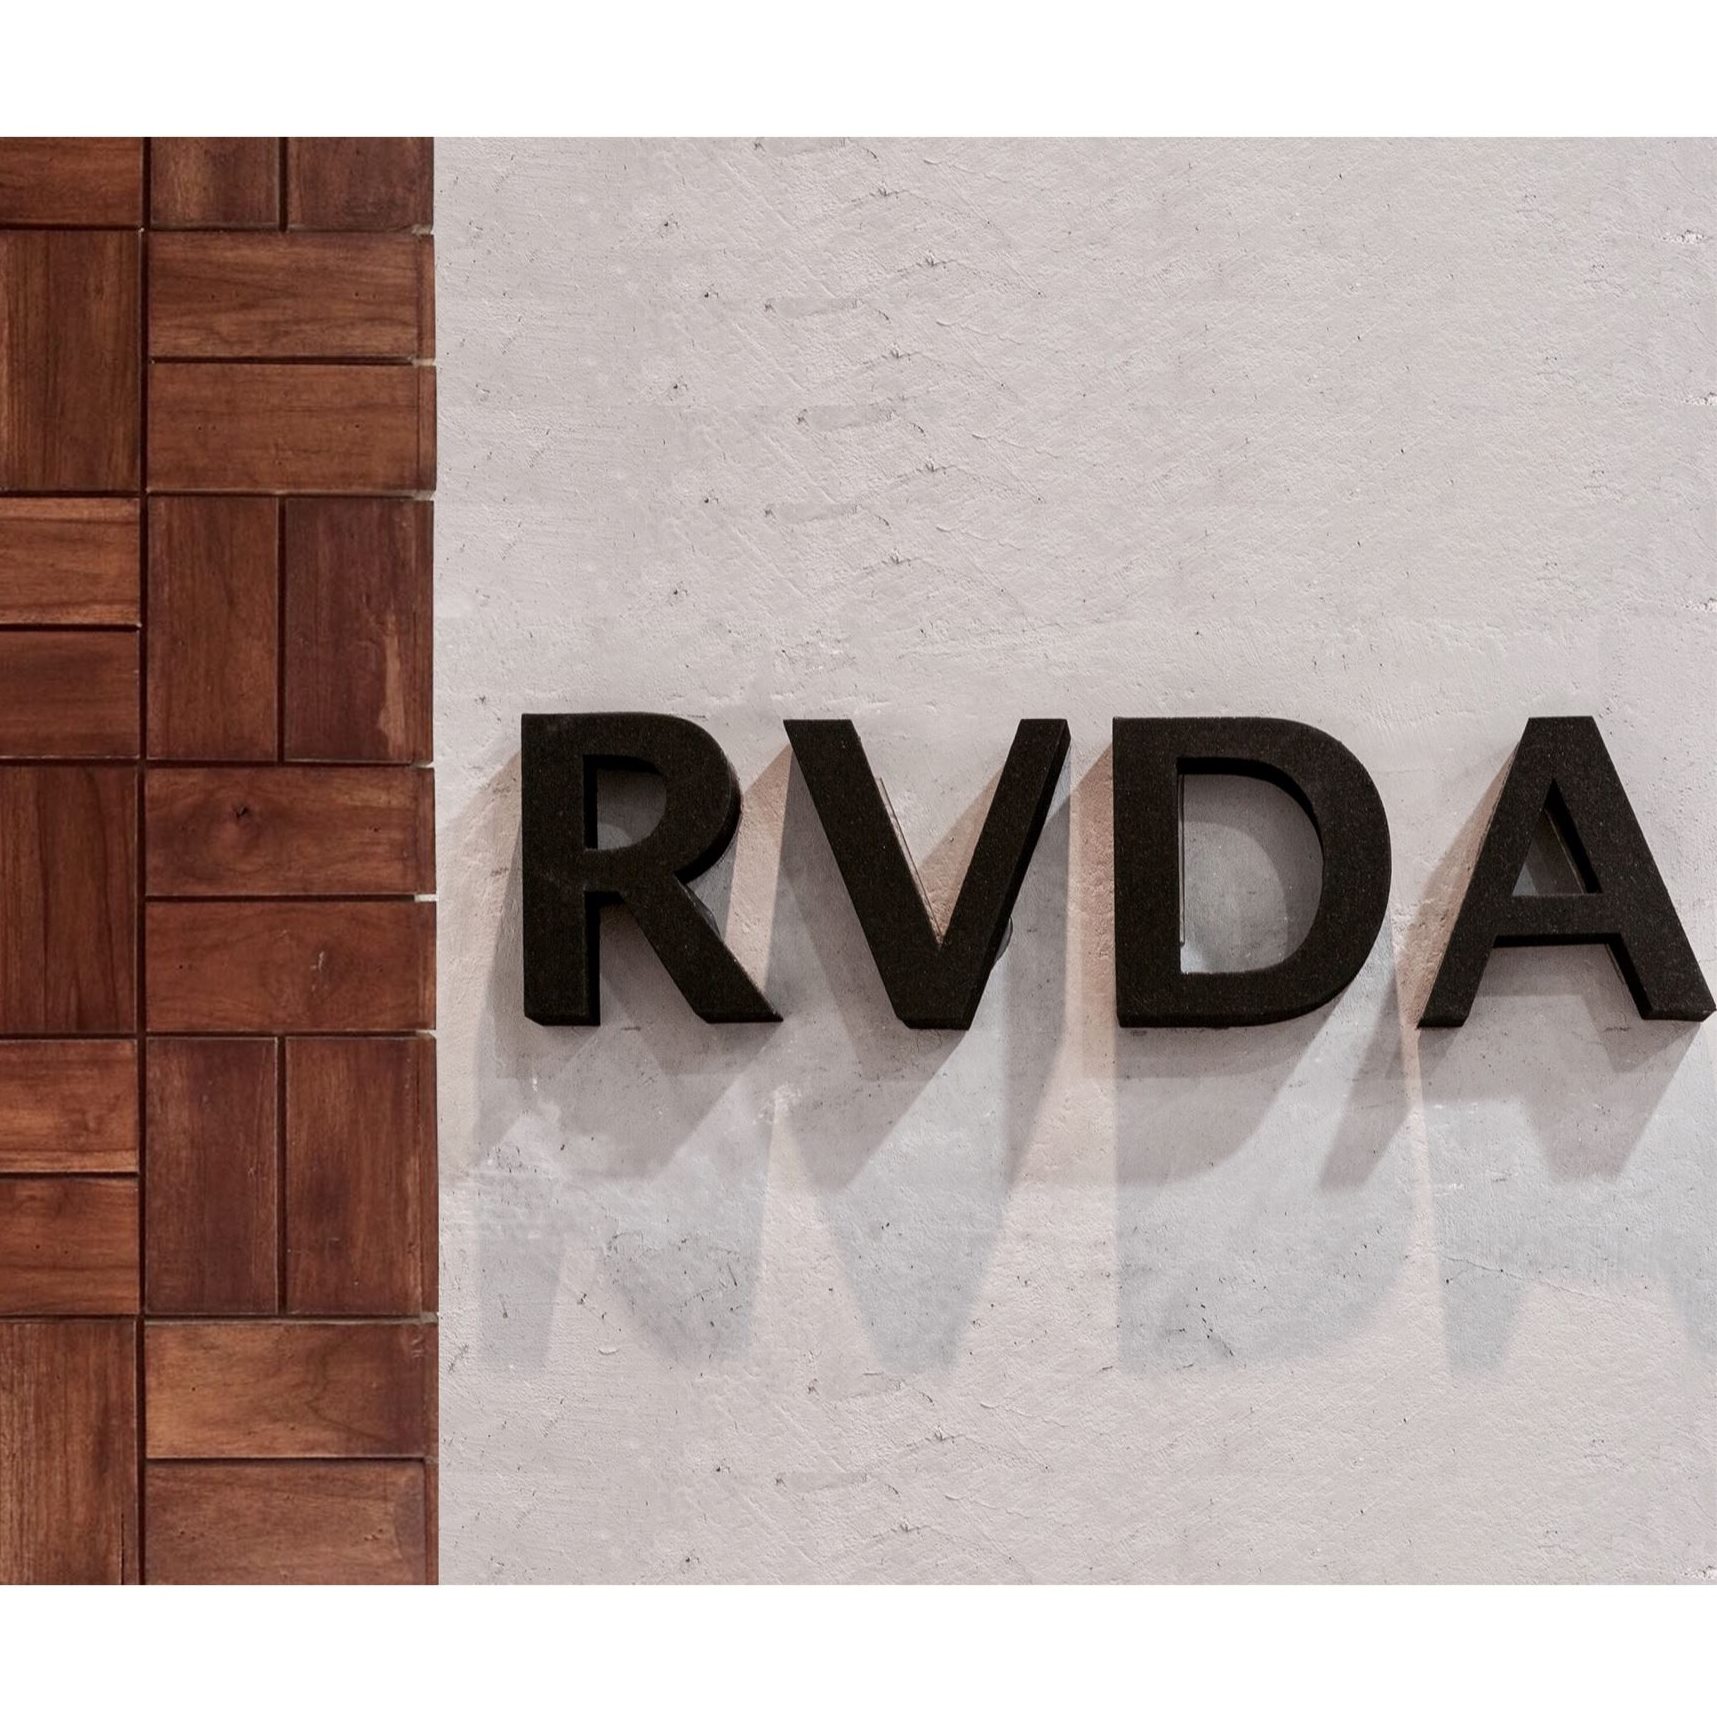 RVDA|IT Services|Professional Services